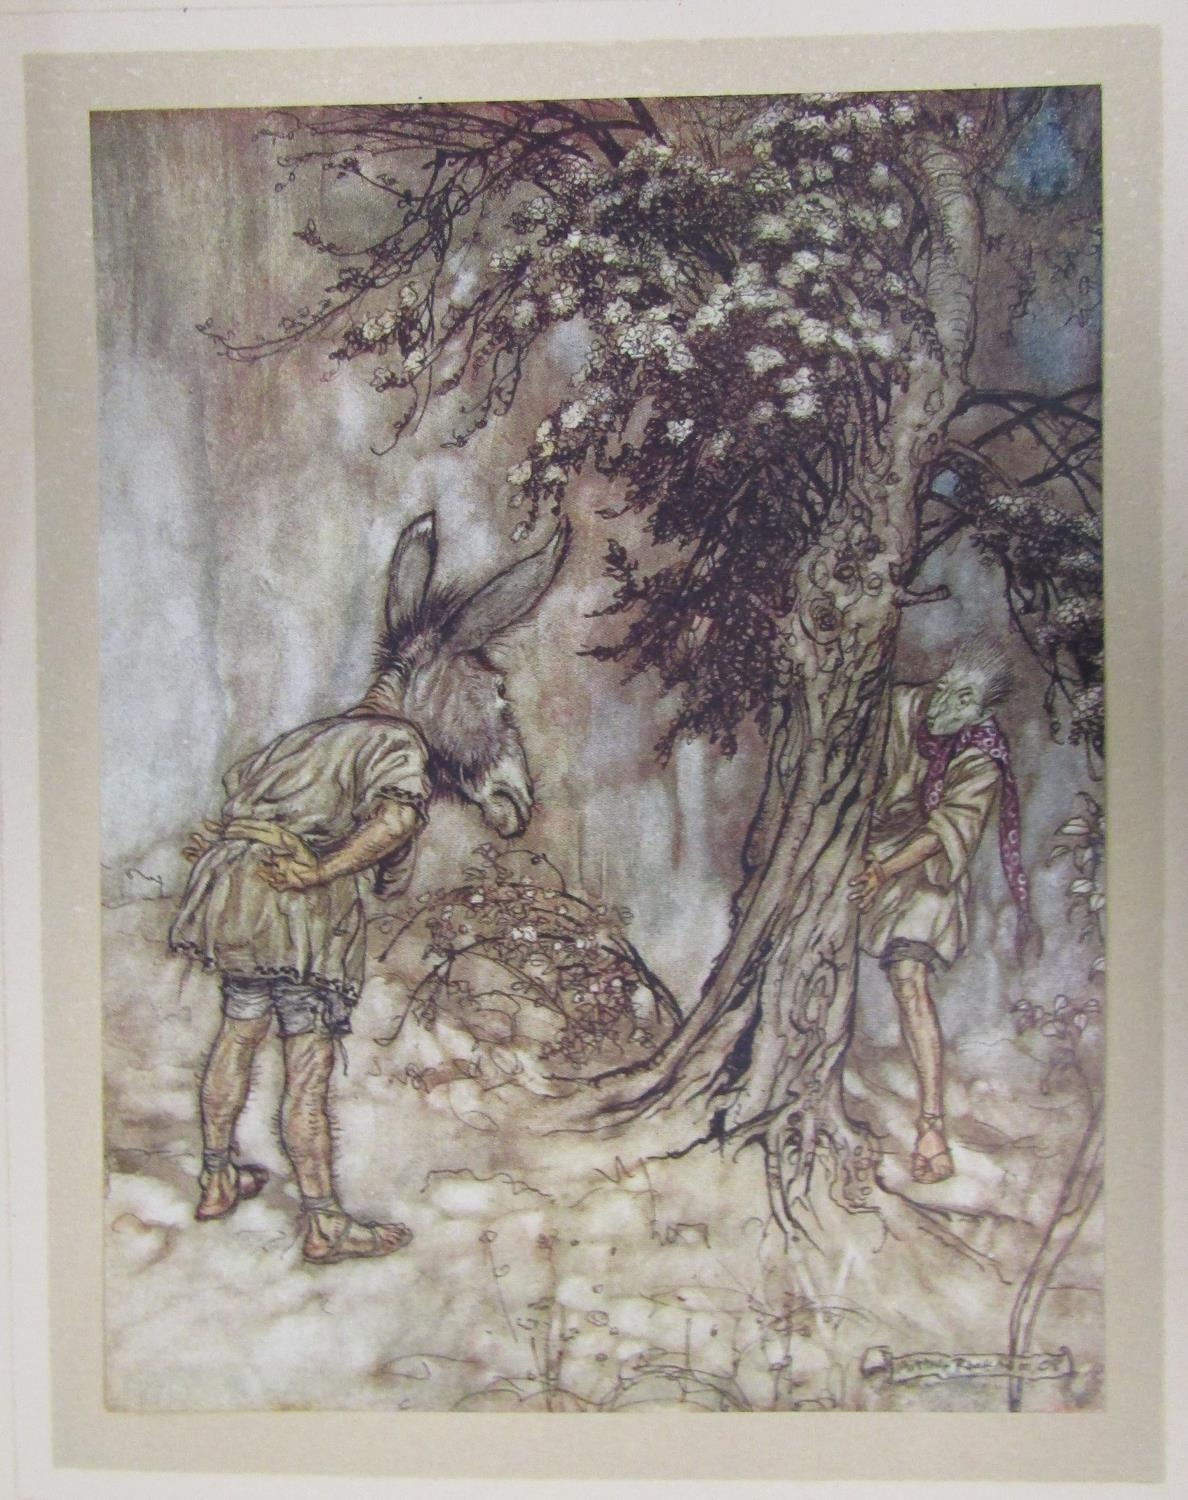 Books about/illustrated by Arthur Rackham including Siegfried The Twilight Of The Gods, The Rhine - Image 7 of 9